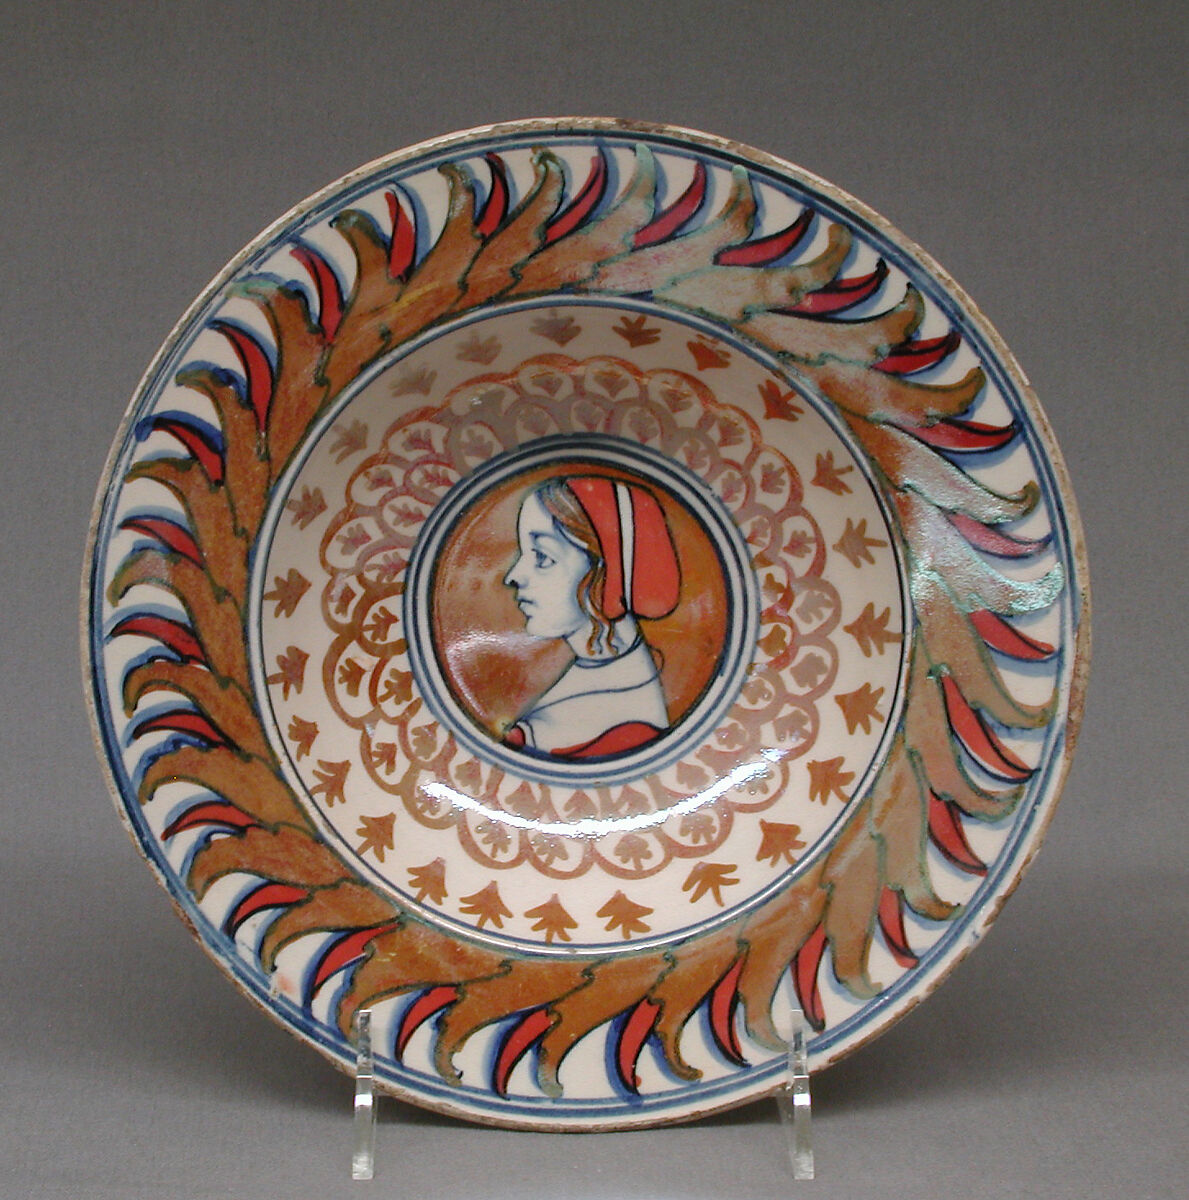 Dish with portrait of a girl, Maiolica (tin-glazed earthenware), lustered, Italian, Gubbio 